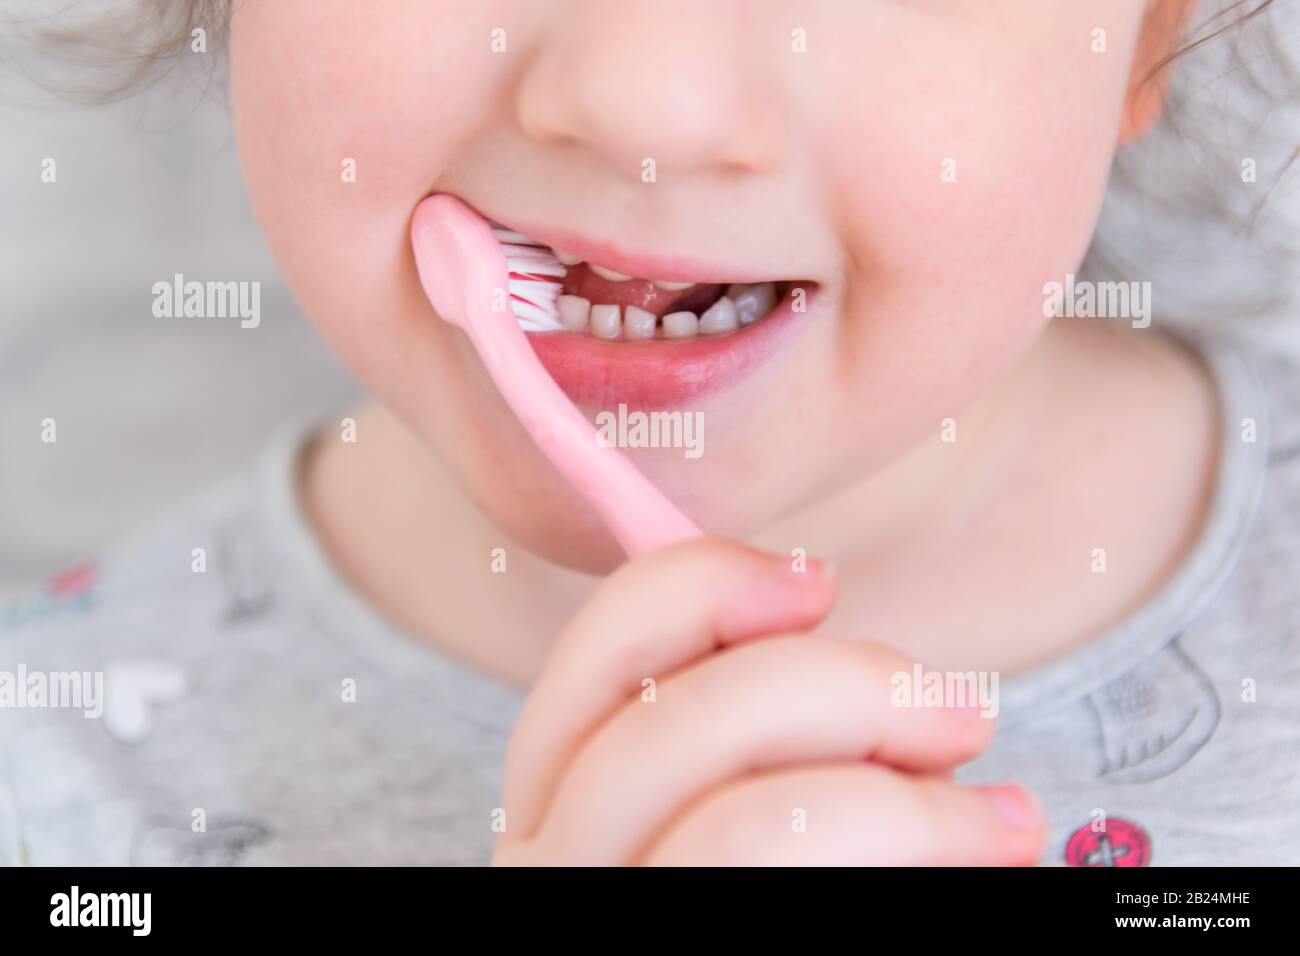 Cute little child in bathroom cleaning the teeth with pink brush. Stock Photo